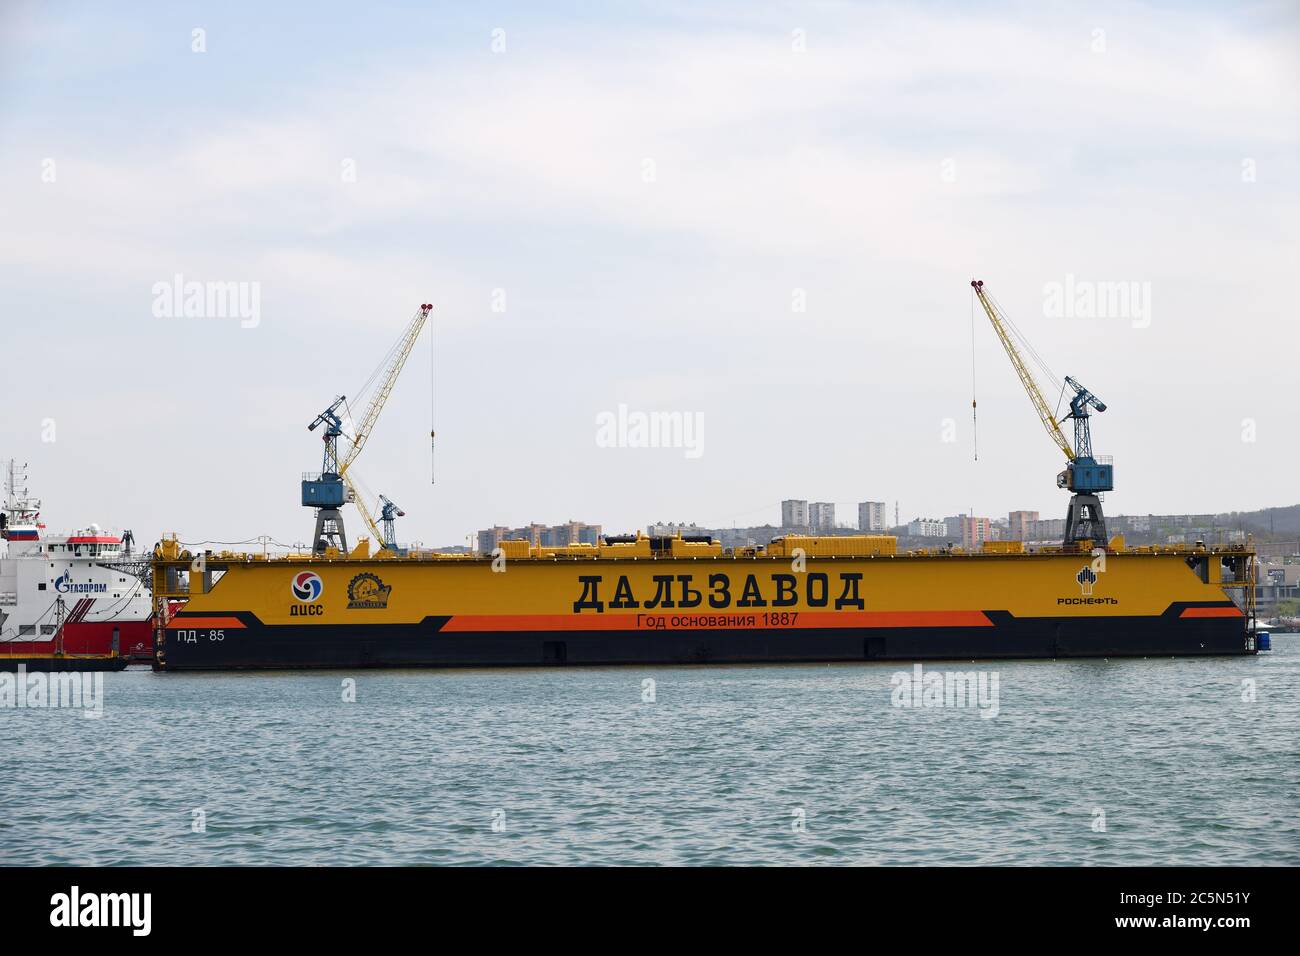 Vladivostok, Russia - April 28 15, 2019: Dalzavod dock The largest defense facility in Vladivostok and one of the largest ship repair yards in Russia Stock Photo